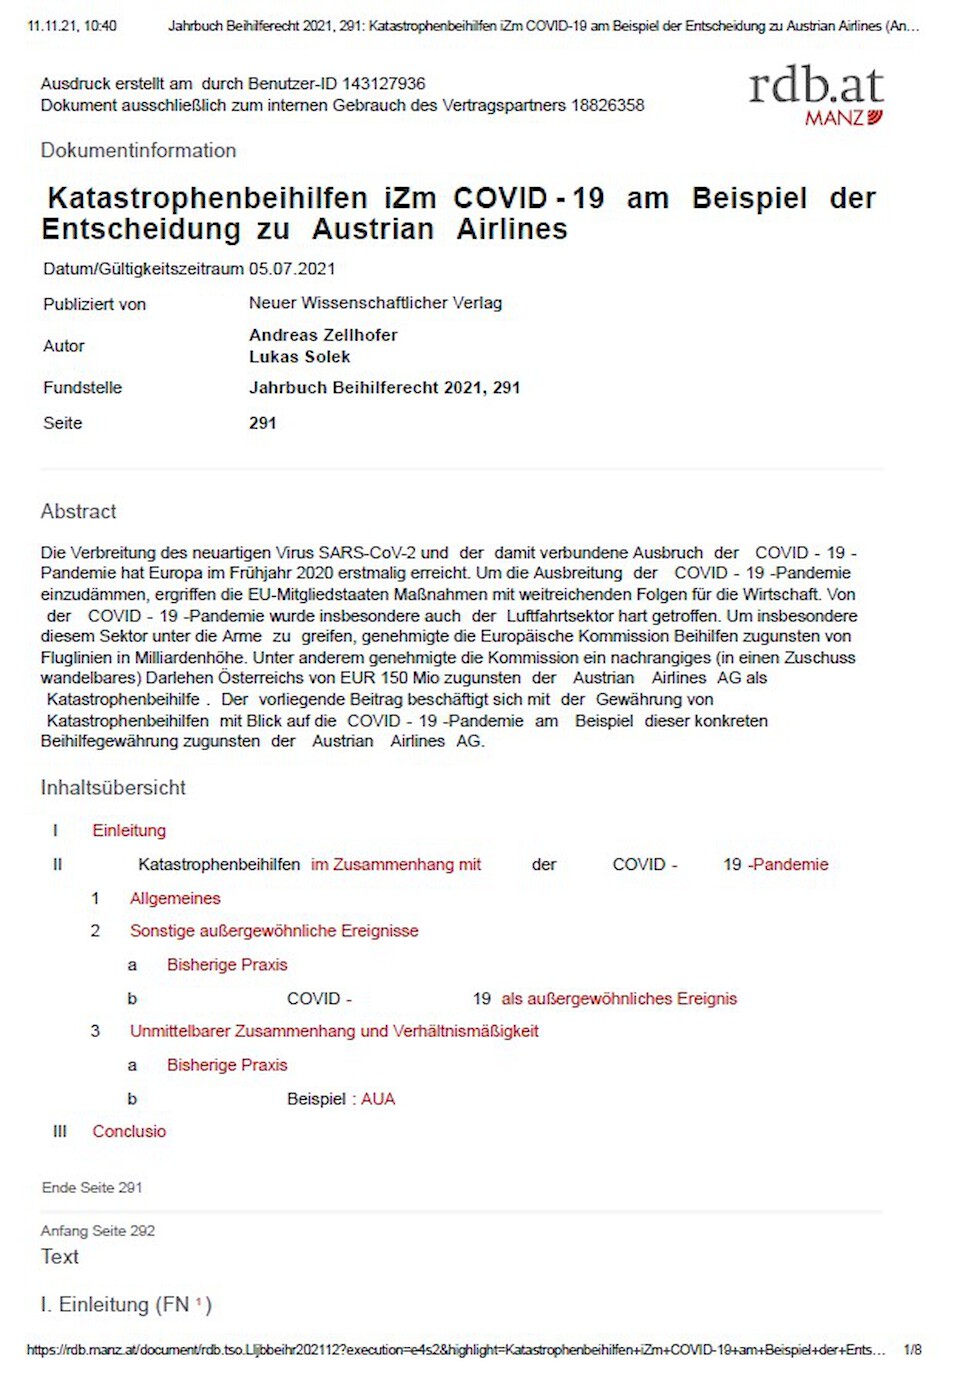 State aid in the context of COVID-19, using the Austrian Airlines decision as an example